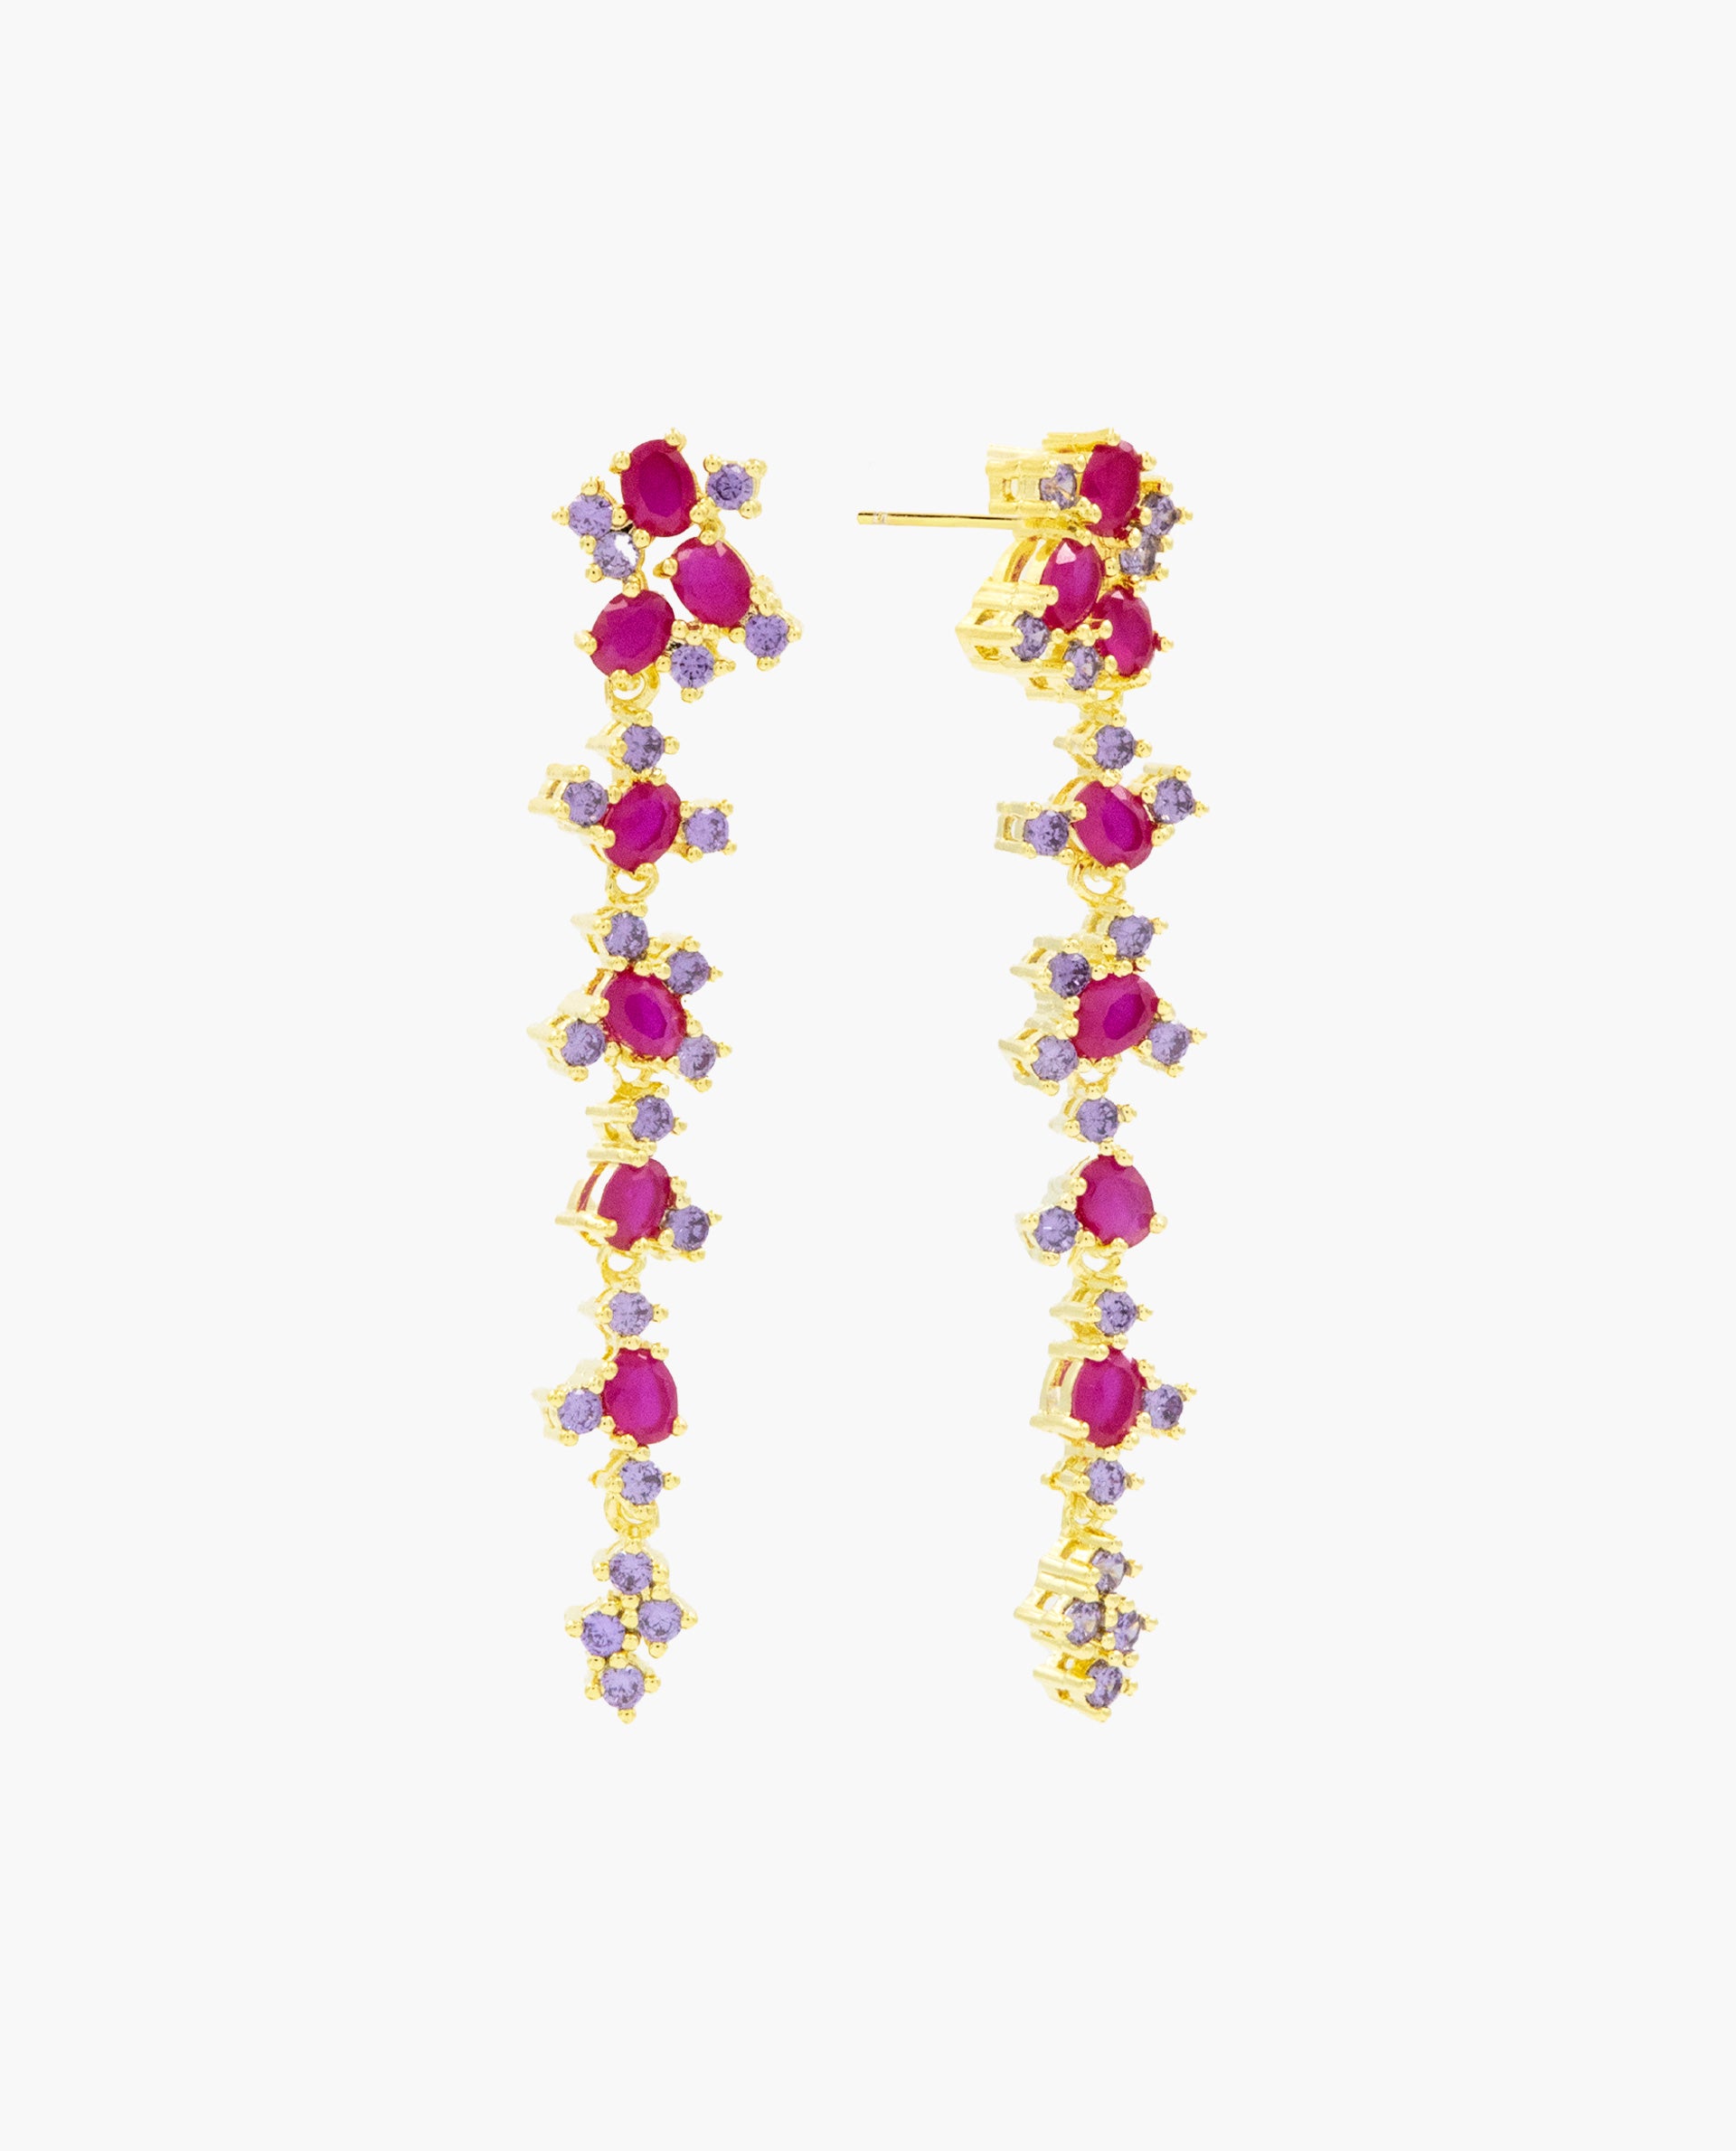 SHINY BERRIES EARRINGS - GOLD PLATED